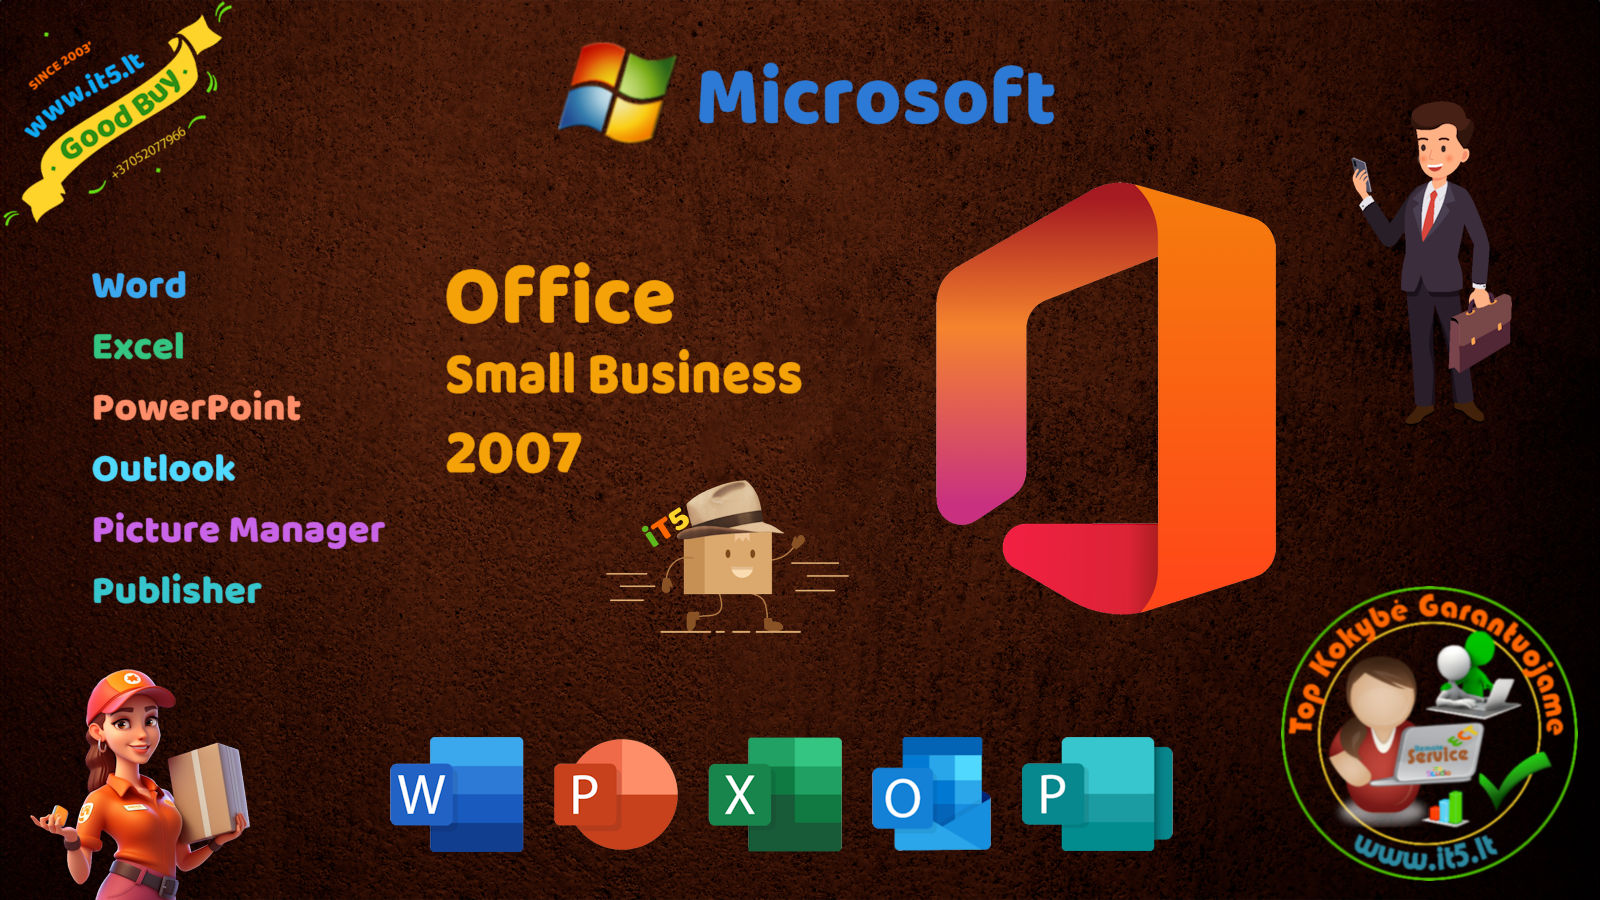 Microsoft Office 2007 Small Business Word Excel PowerPoint Outlook Publisher Picture Manager